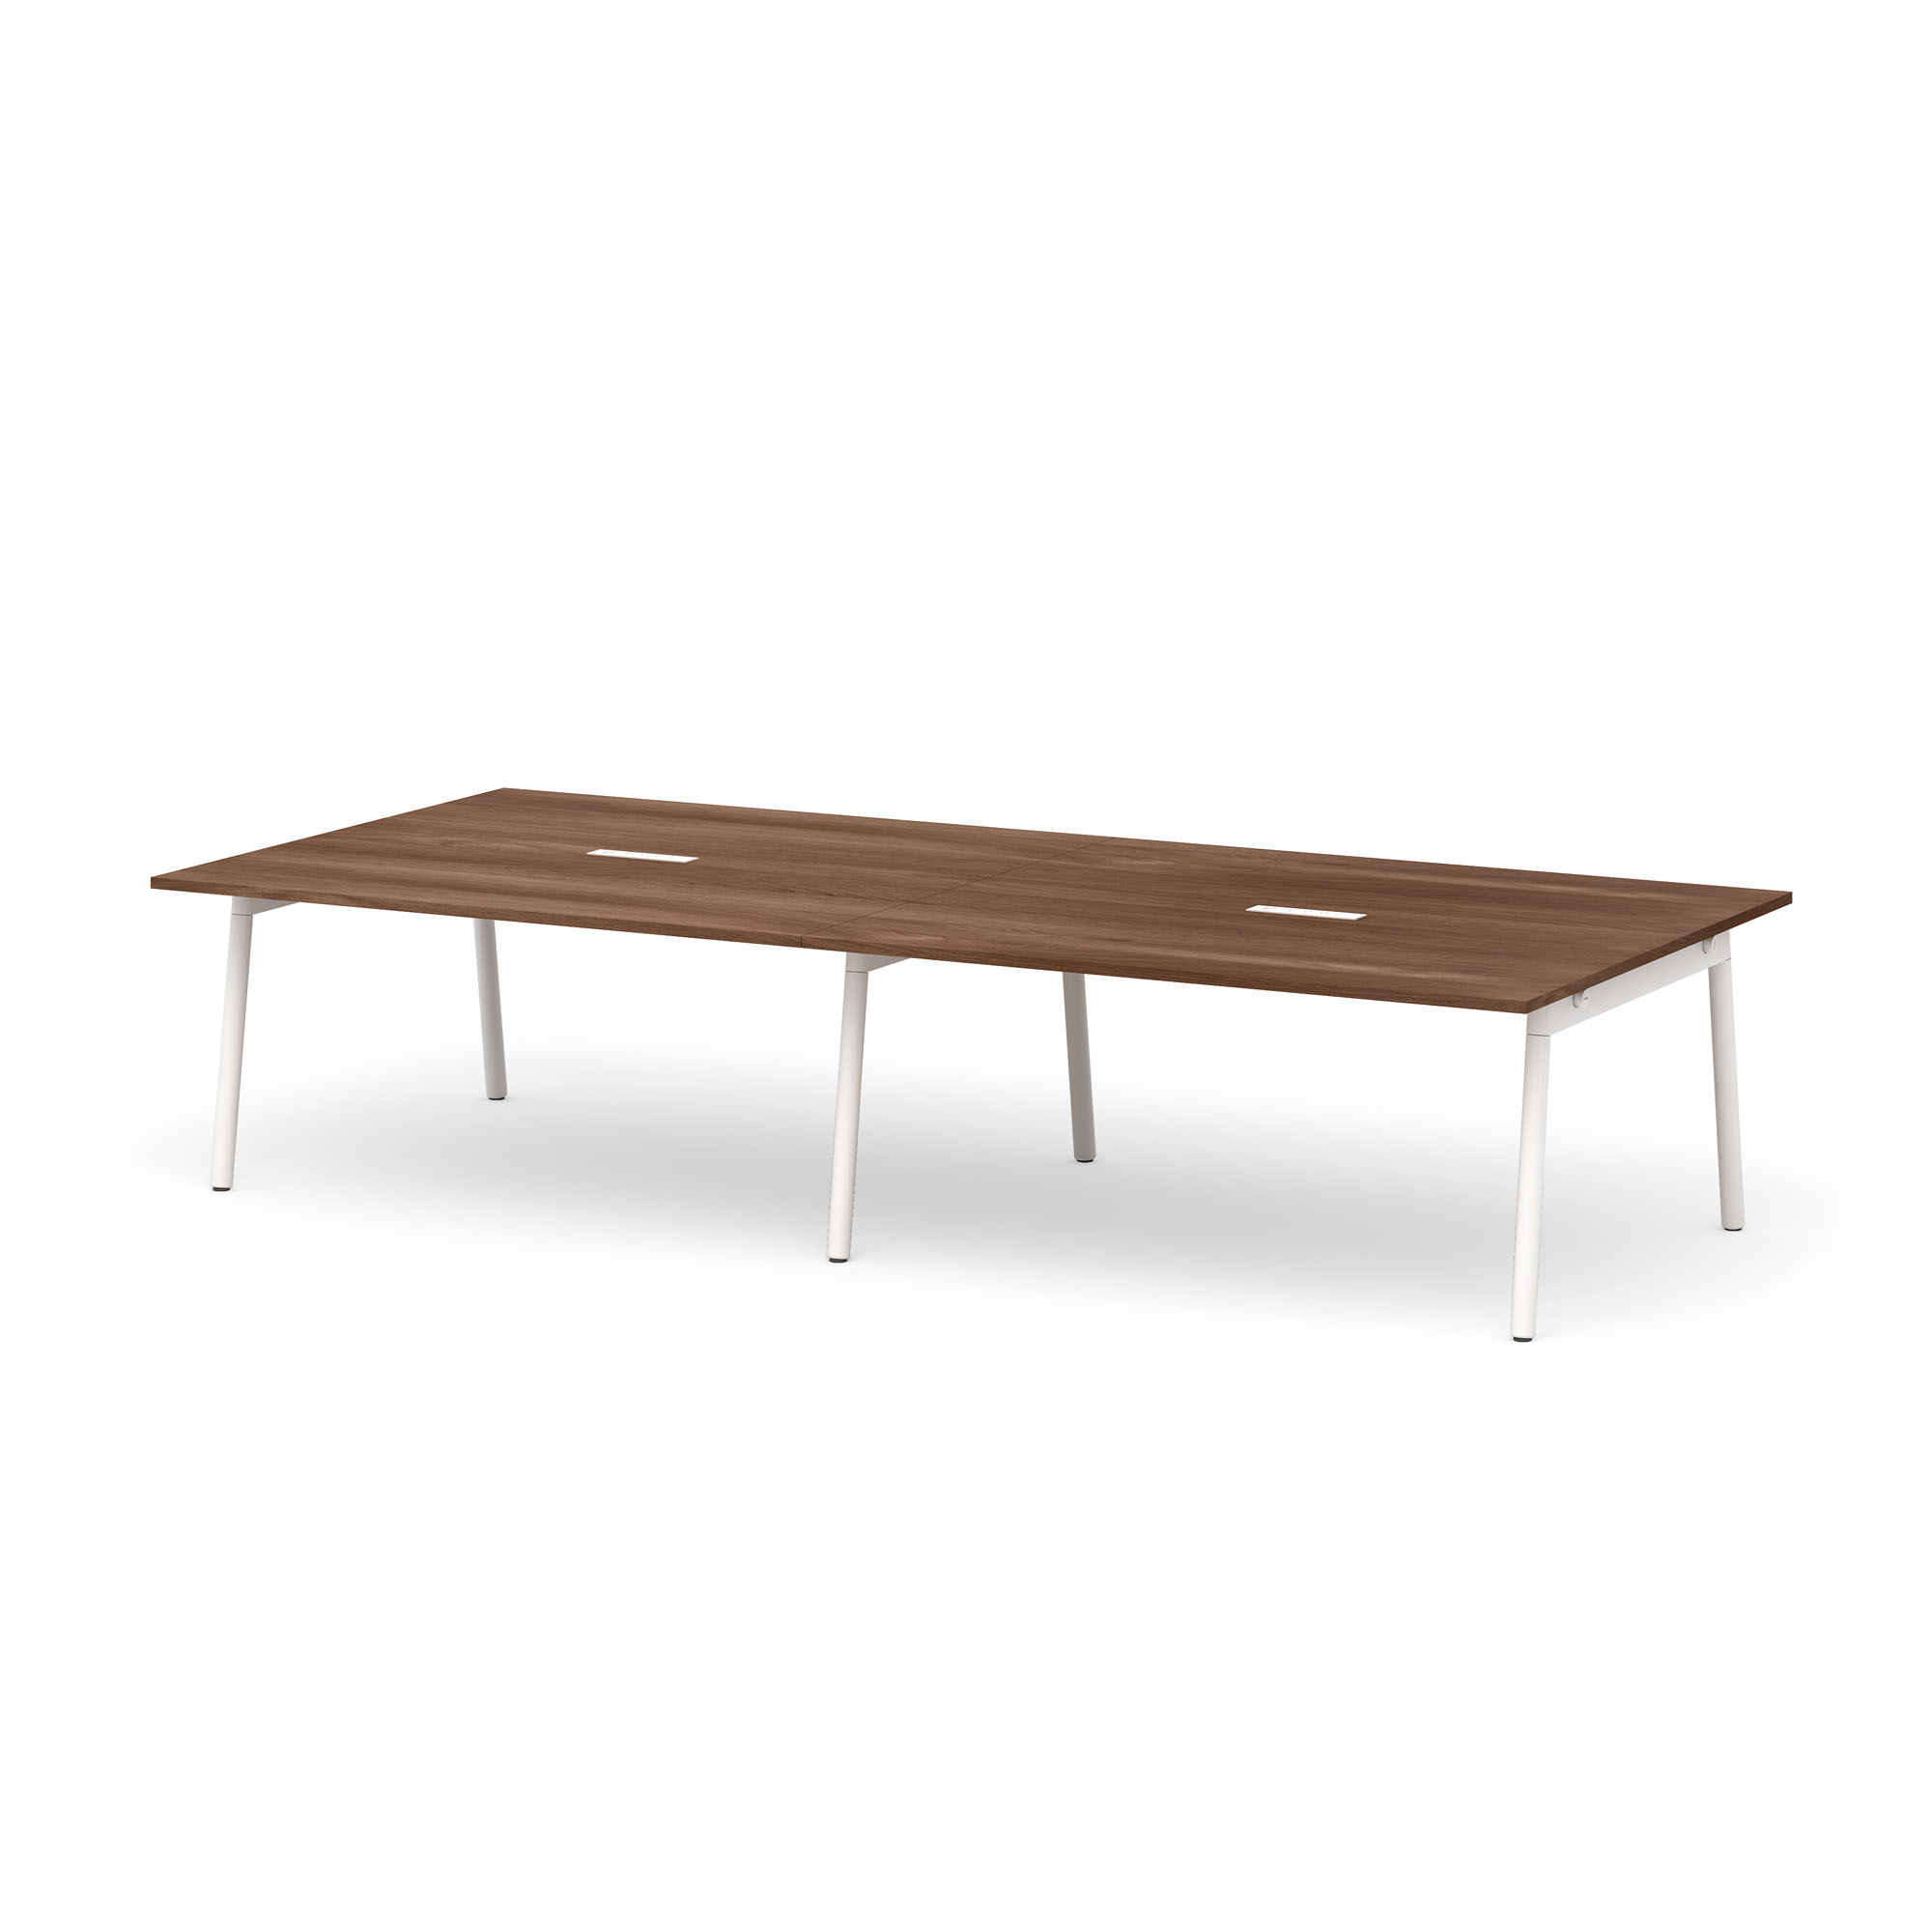 Series A Scale Rectangular Conference Table, White Legs